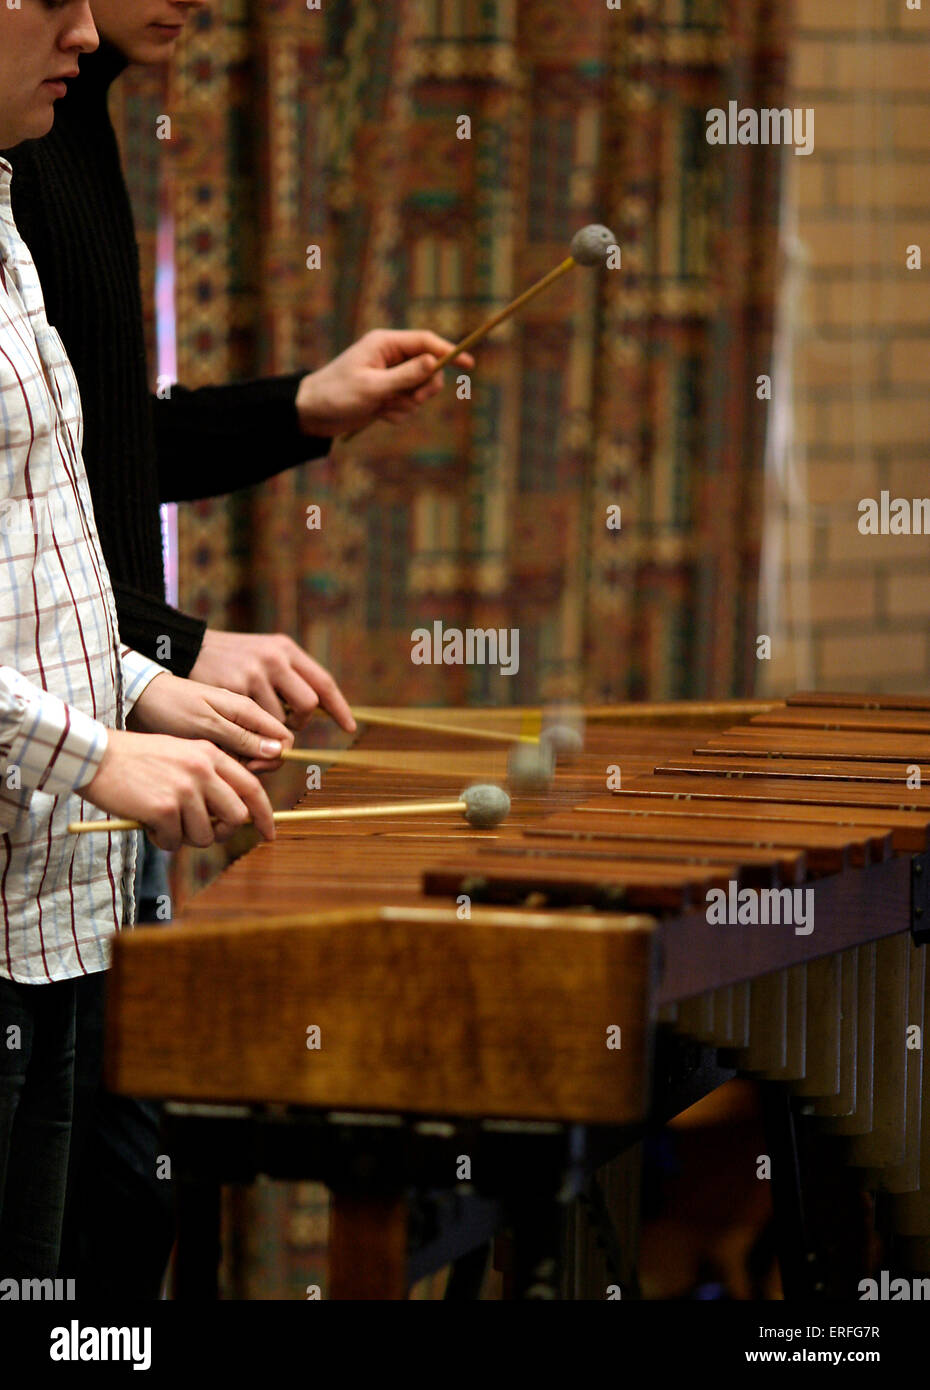 Marimba - being played by two people Stock Photo